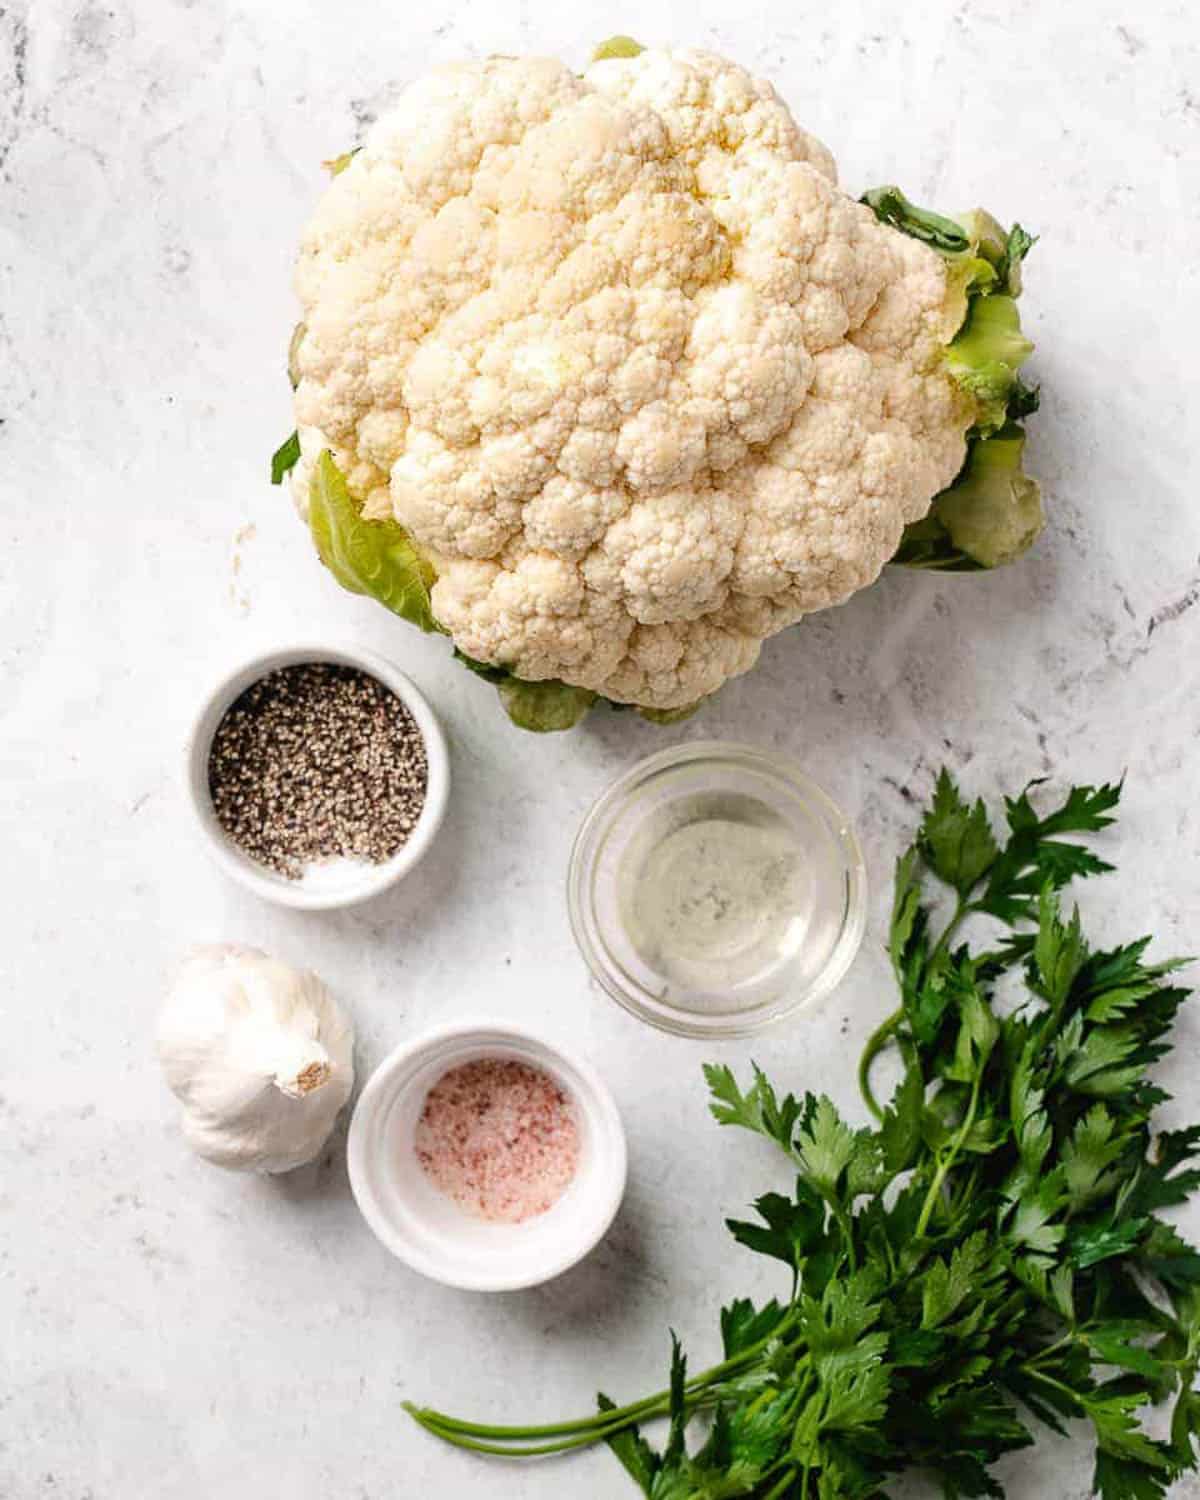 Cauliflower with alt and pepper and parsley.